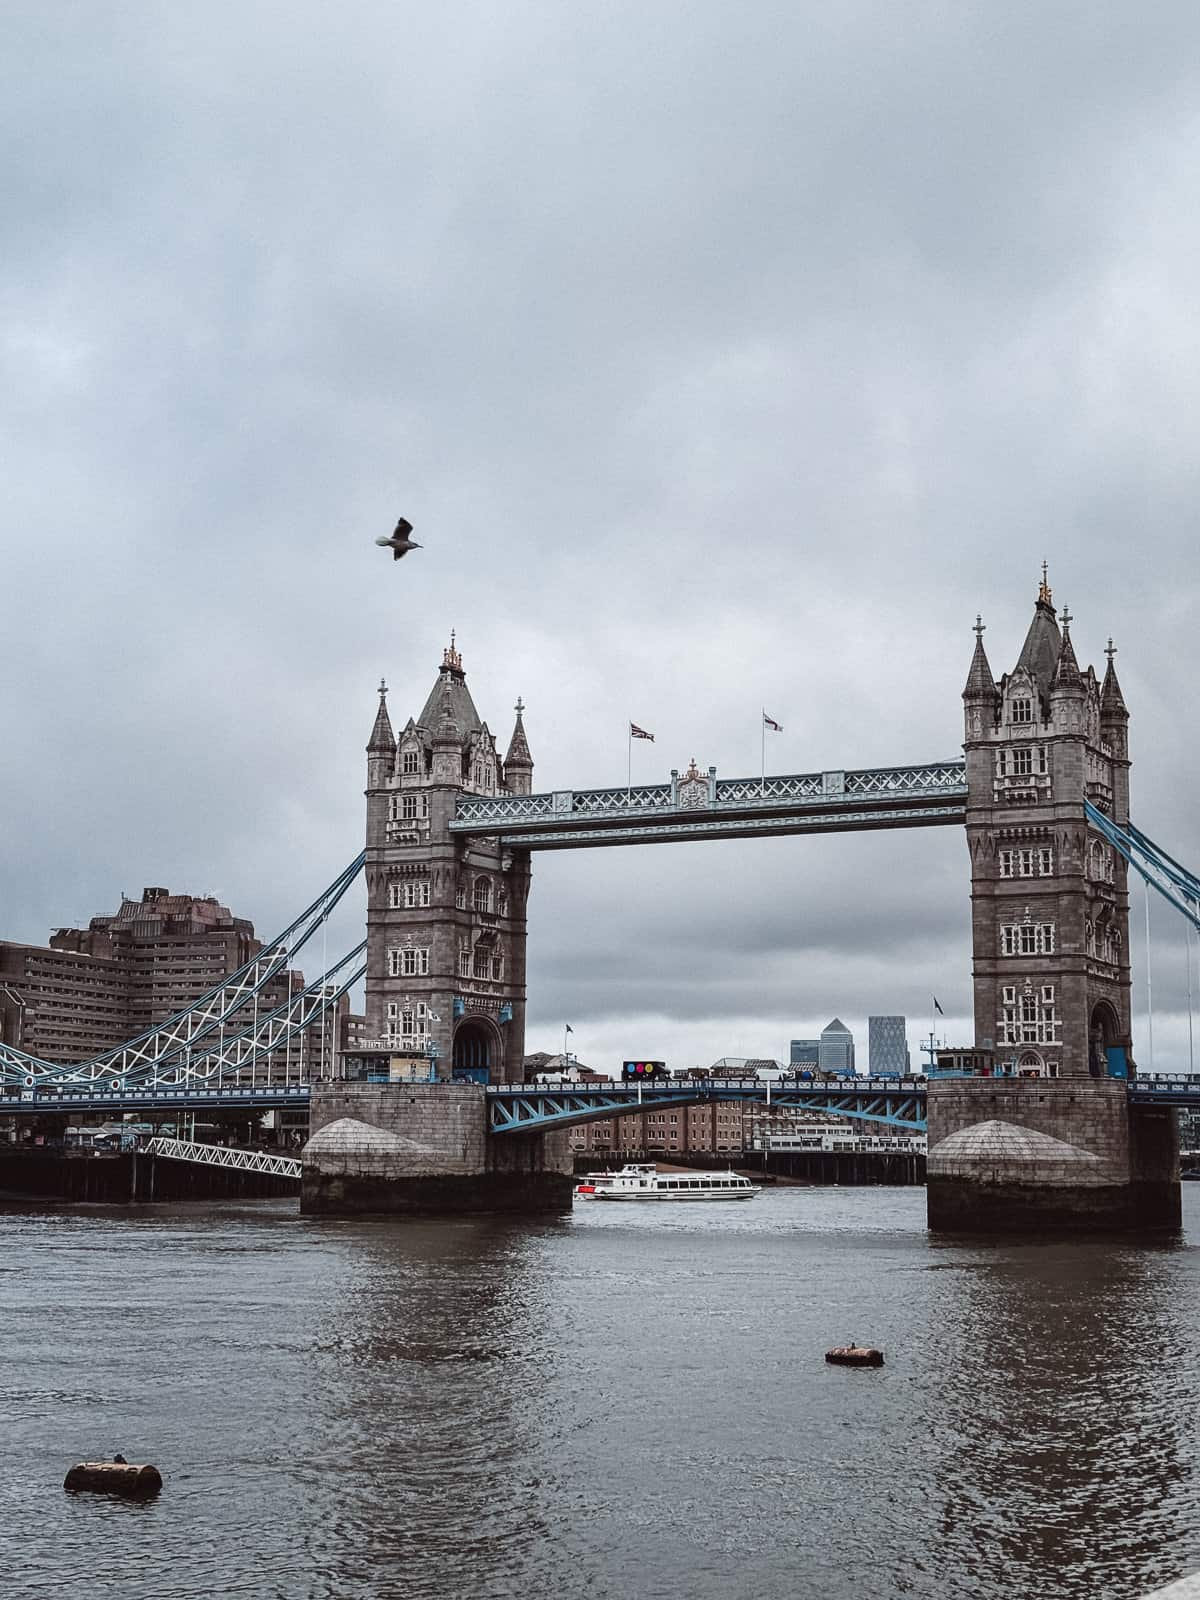  The iconic Tower Bridge in London on an overcast day, with its majestic towers and blue accents, as a boat passes underneath and a bird soars above, symbolizing the enduring splendor of this historic city.